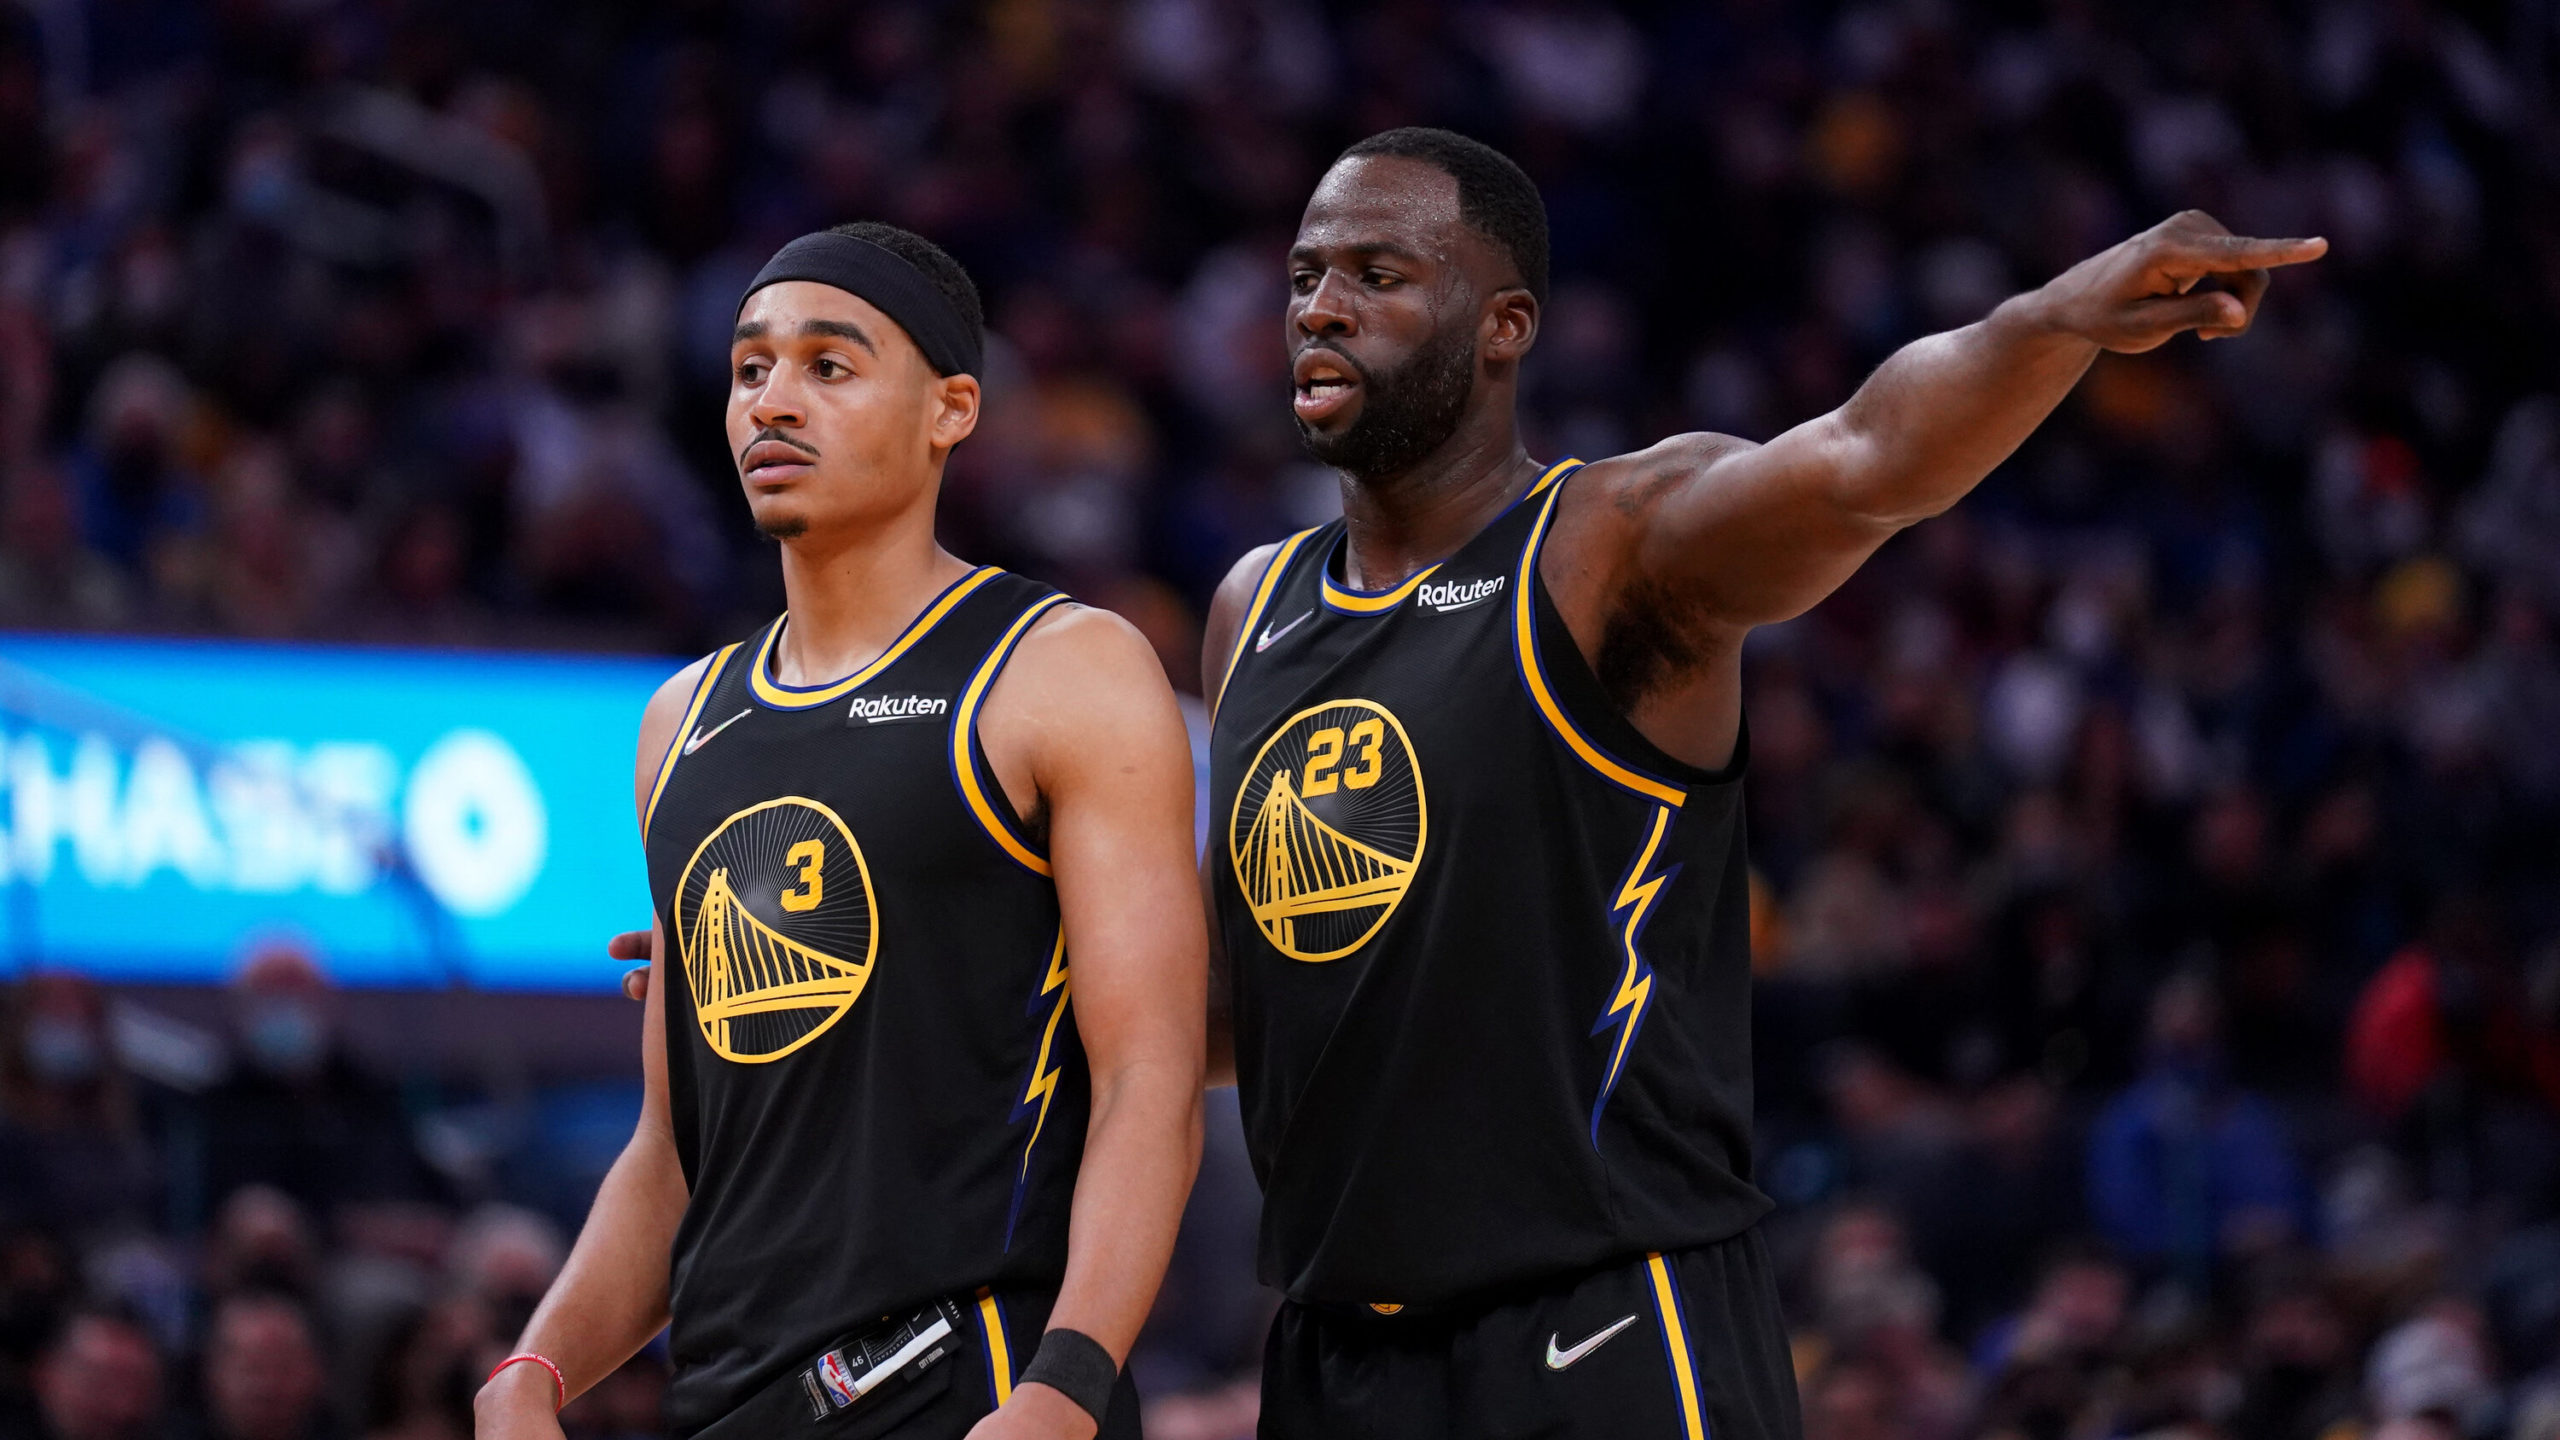 Watch Draymond Green Try to Justify Why He Punch Jordan Poole